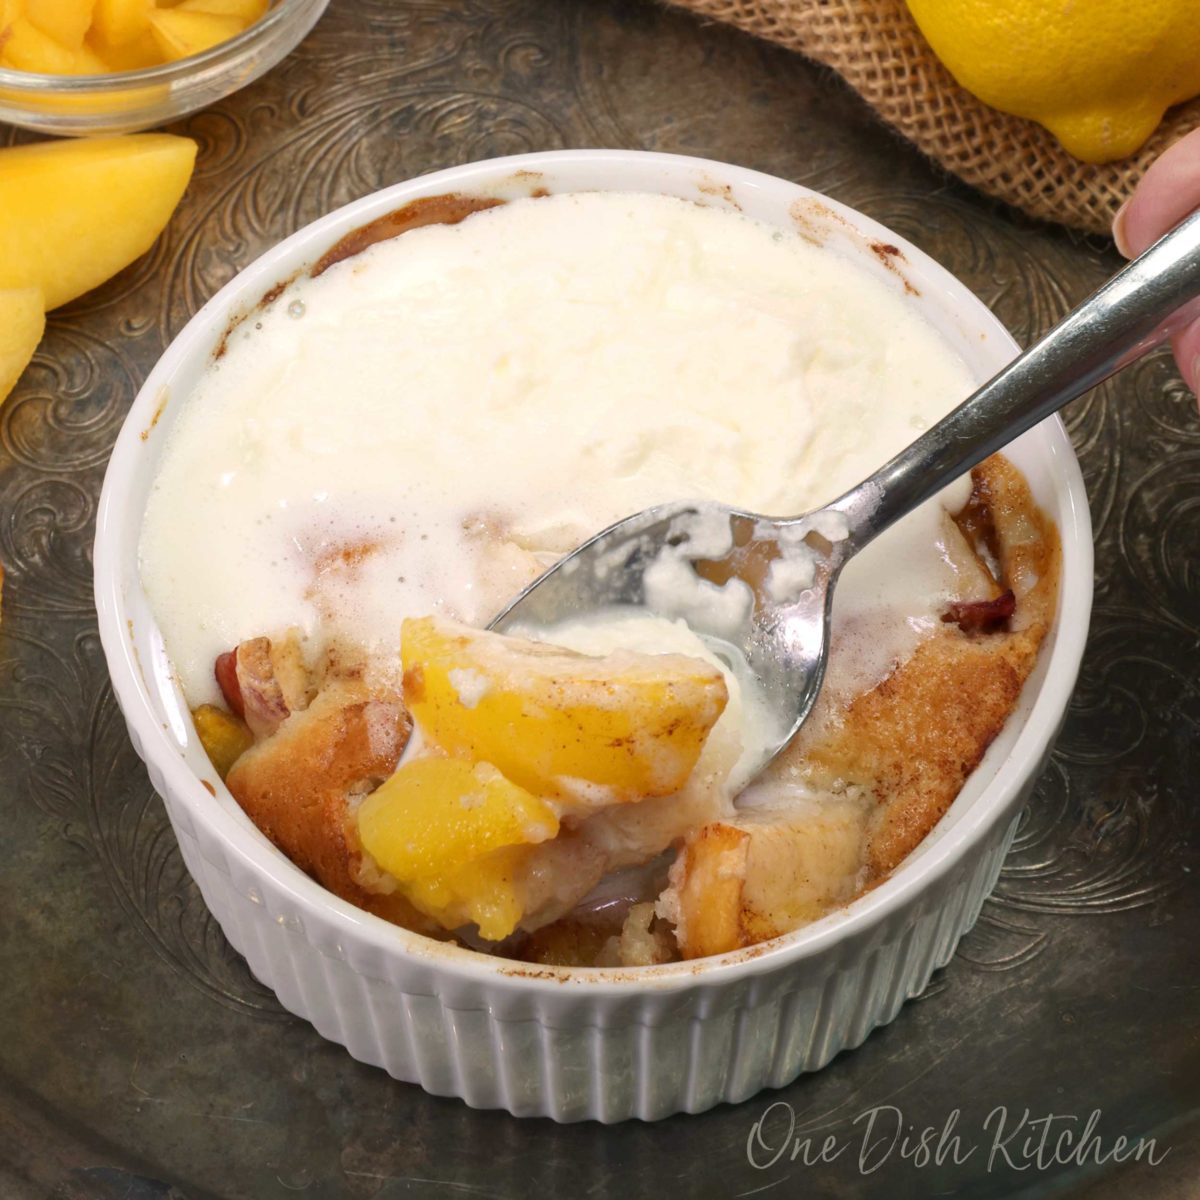 a spoon in the corner of a bowl of peach cobbler with peaches and whipped cream on the spoon.